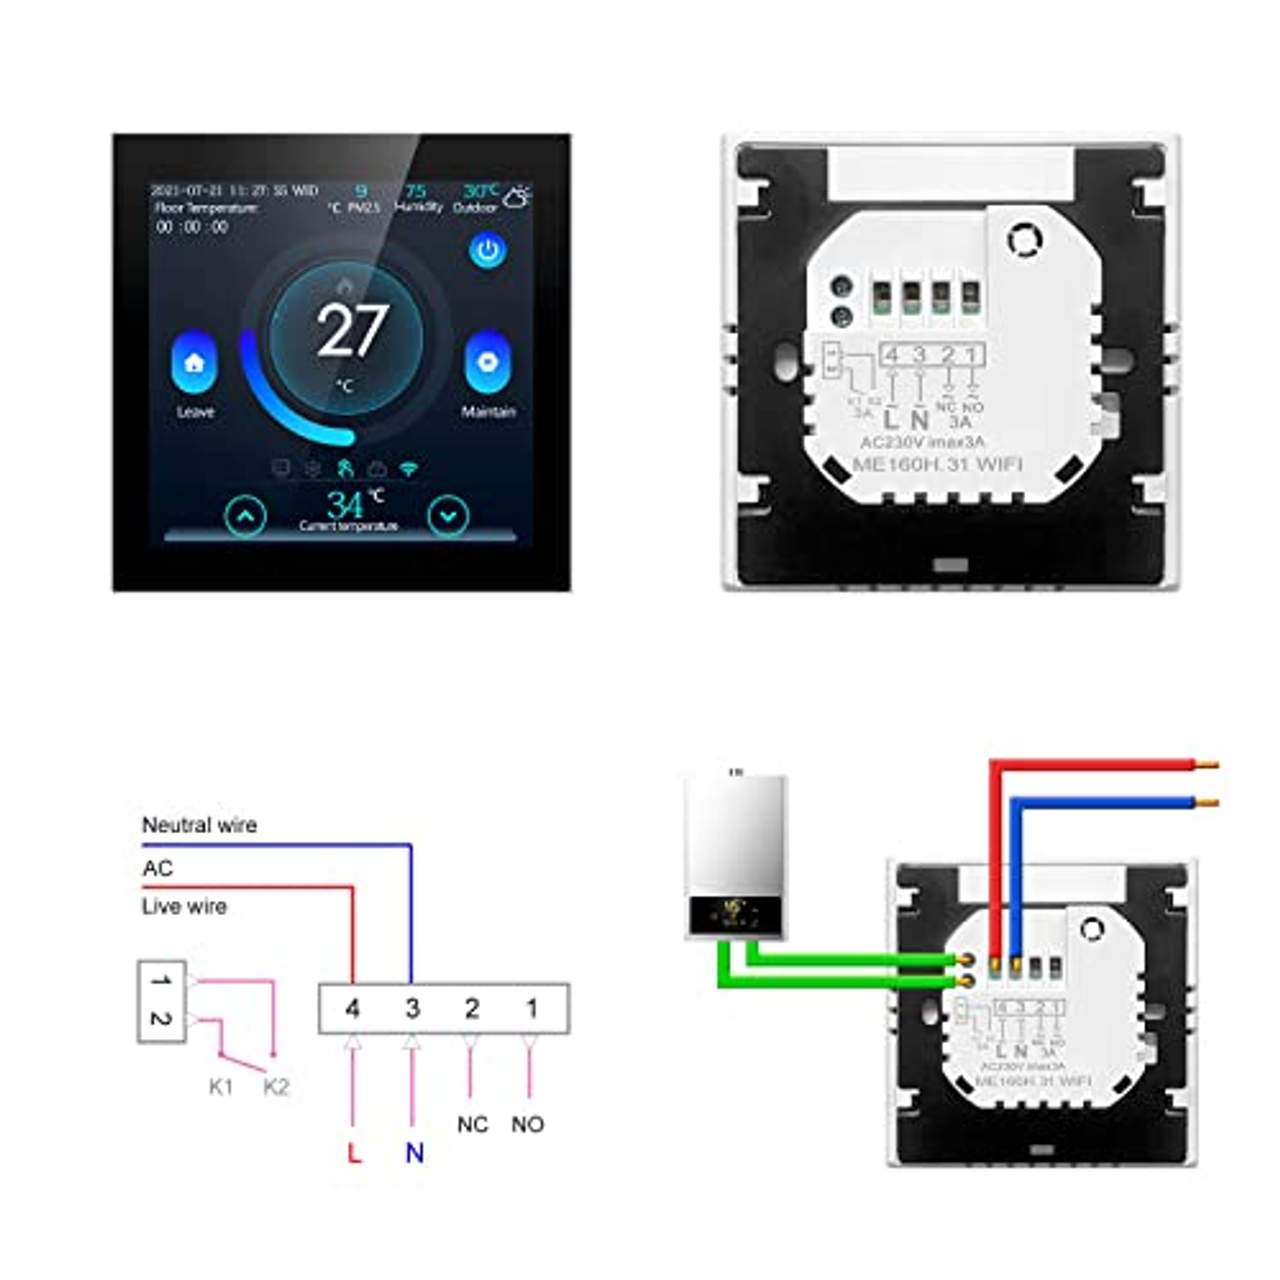 AVATTO Smartes Thermostat -Touchscreen WLAN fähiges Programmierbarer